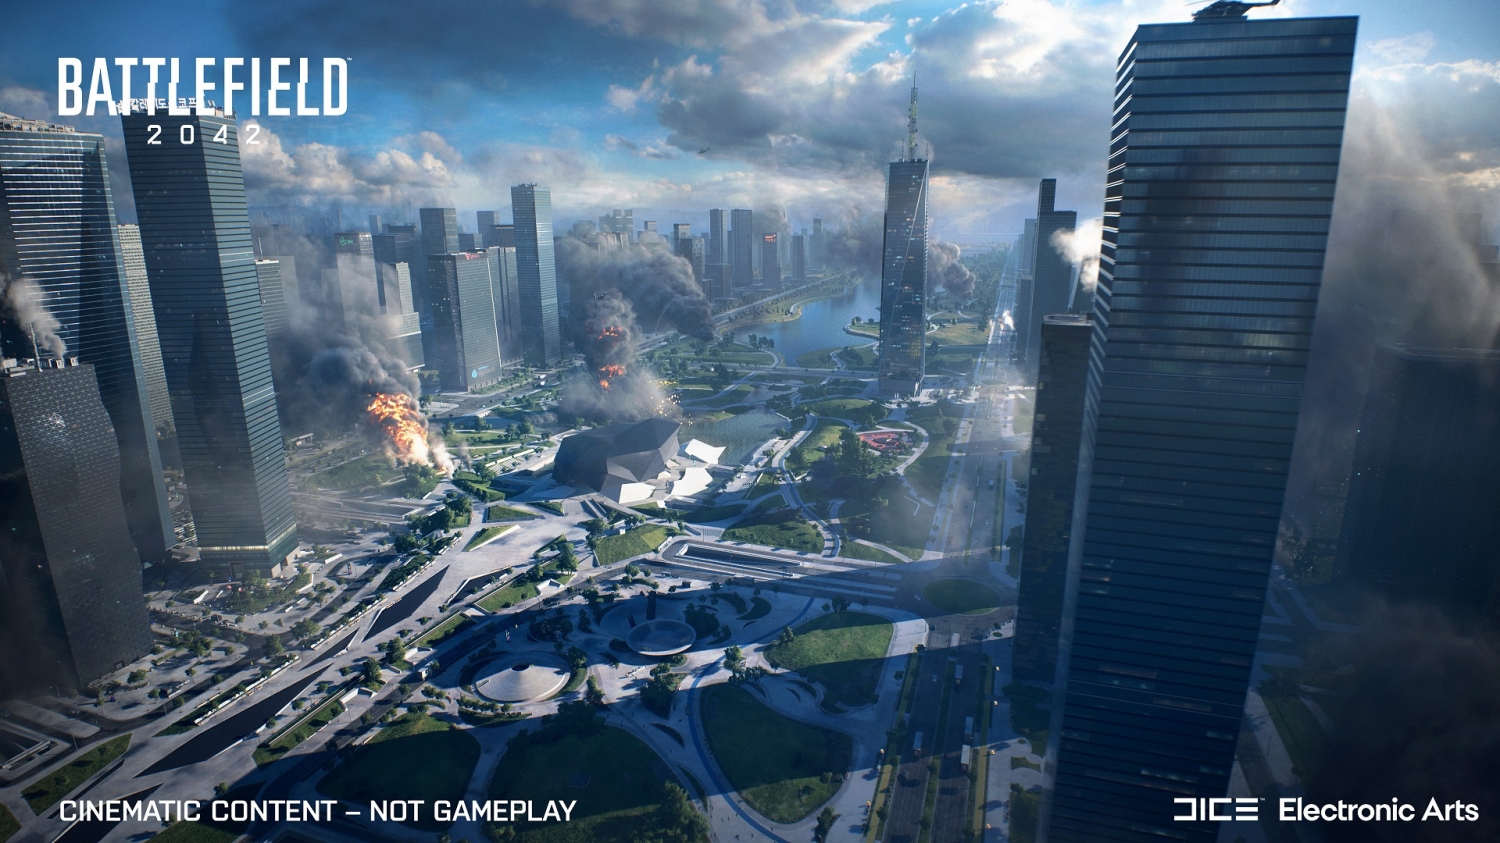 Battlefield 2042 Will Offer Crossplay for Console and PC Owners